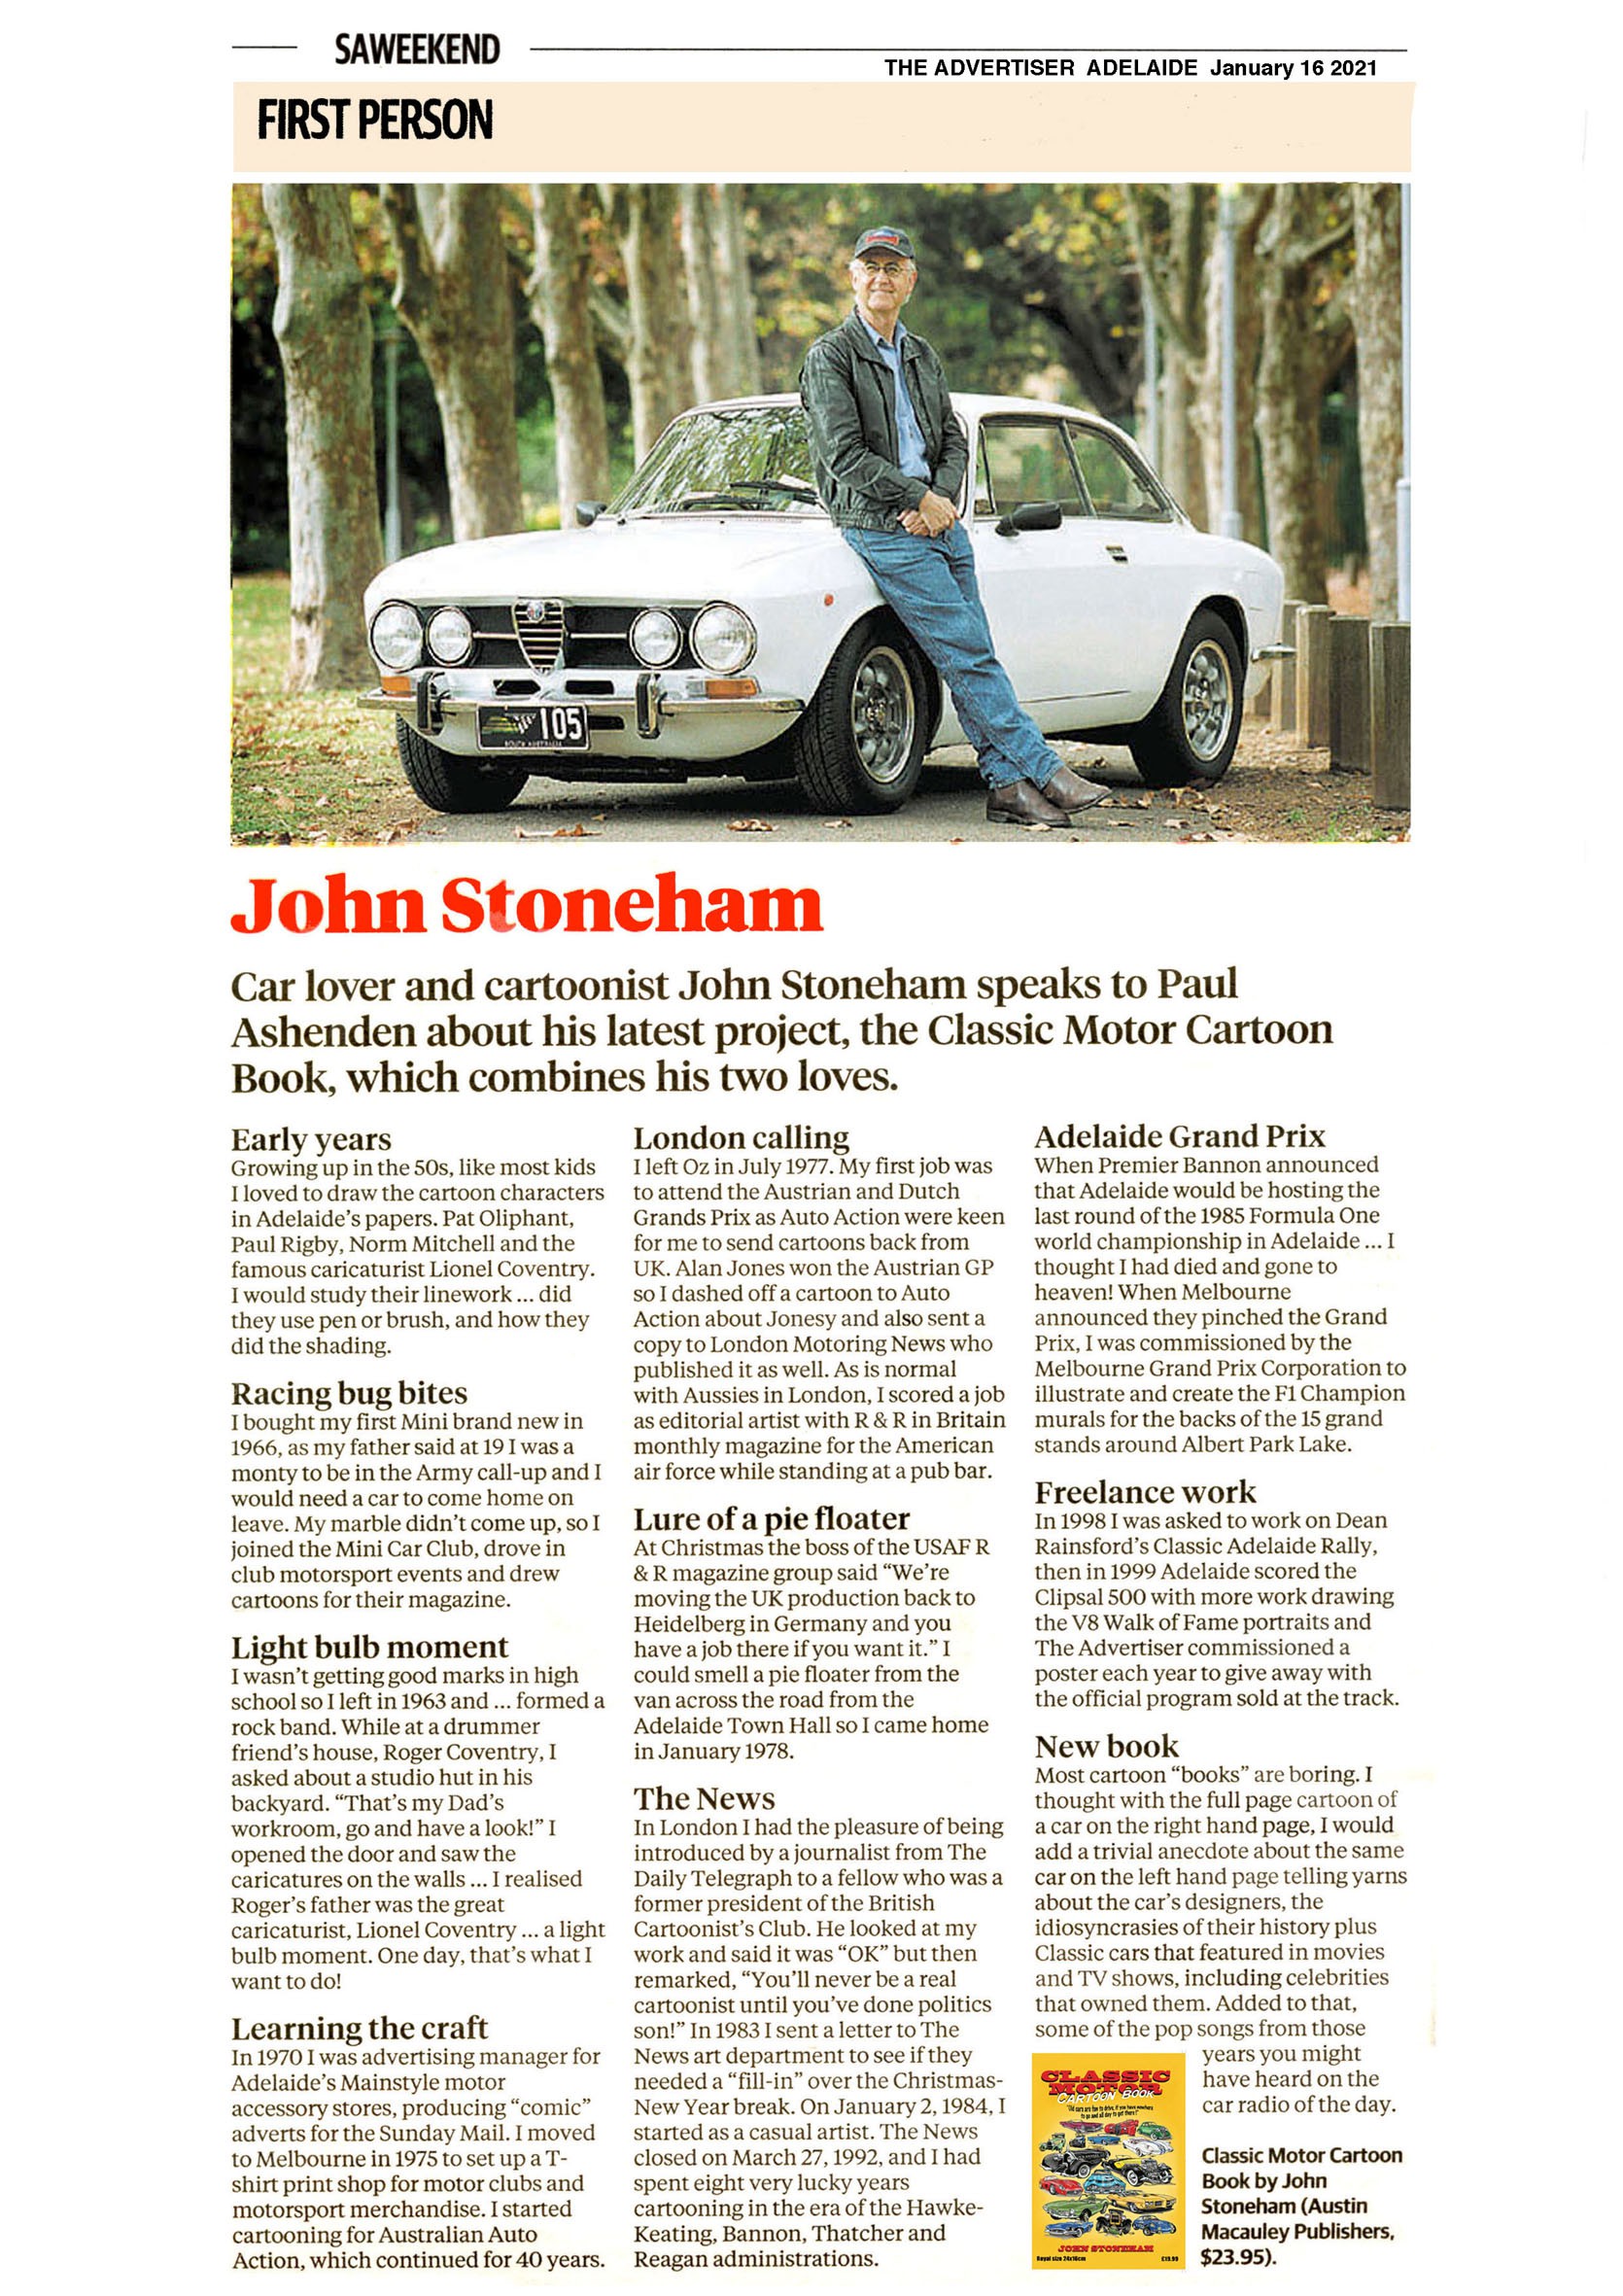 John Stoneham Gets Featured in the SAWEEKEND Section of the Advertiser Adelaide